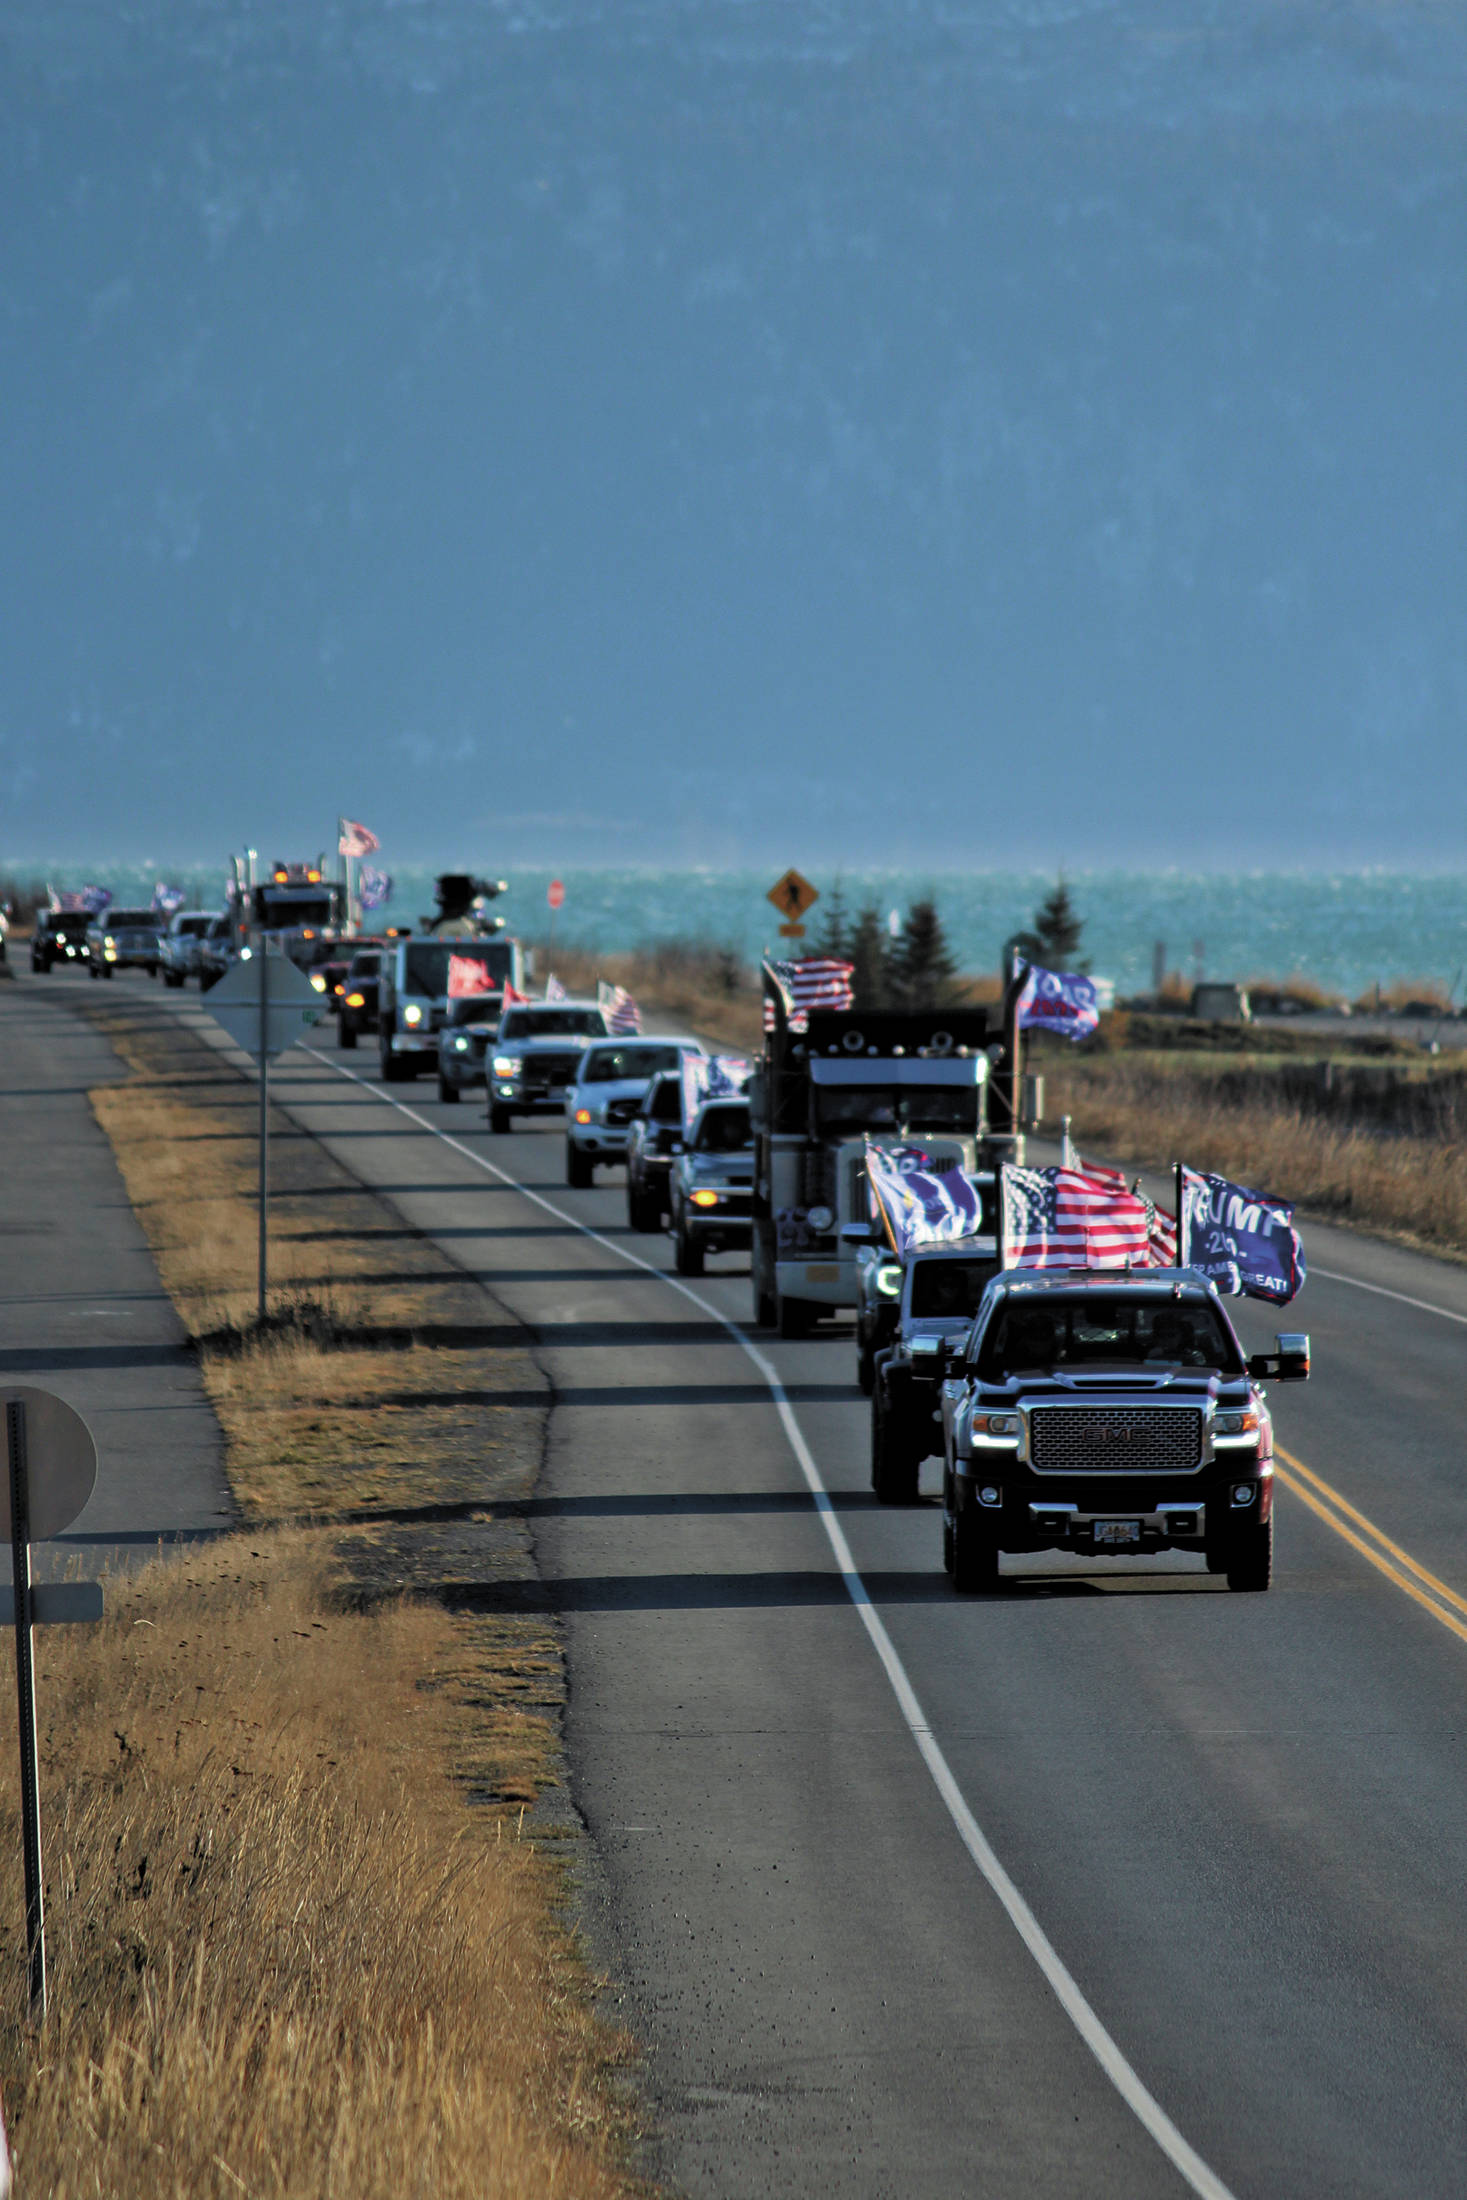 Participants in a vehicle parade to support President Donald Trump make their way off the Homer Spit on Sunday, Nov. 1, 2020 in Homer, Alaska. (Photo by Megan Pacer/Homer News)